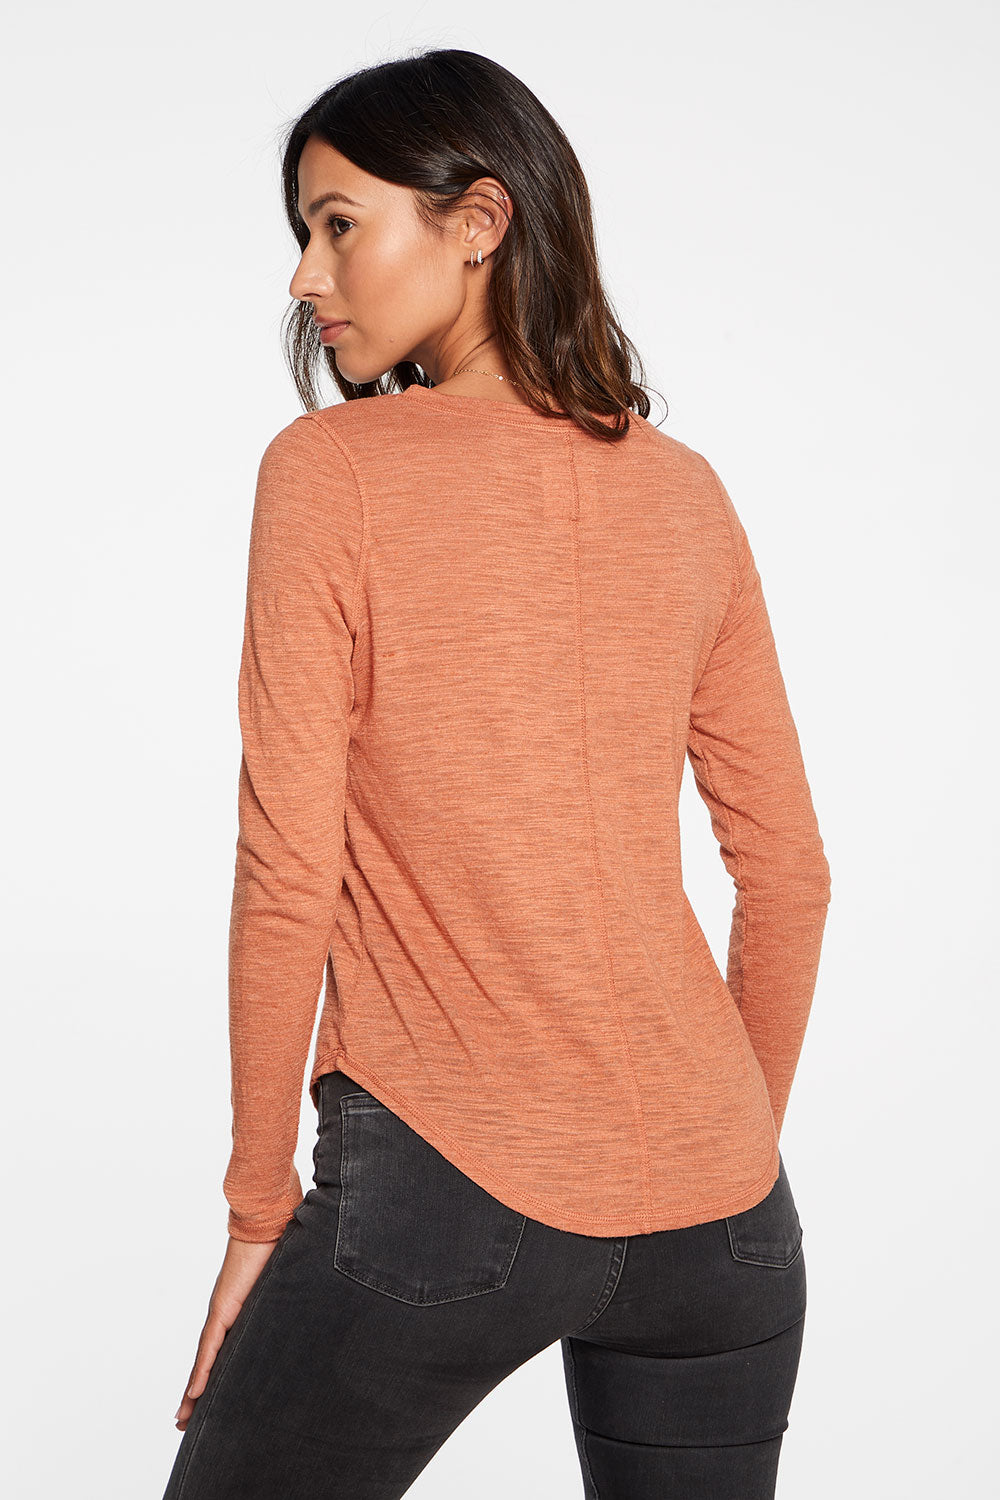 Slub Jersey Long Sleeve Seamed Tee in Sunkissed Brown WOMENS - chaserbrand